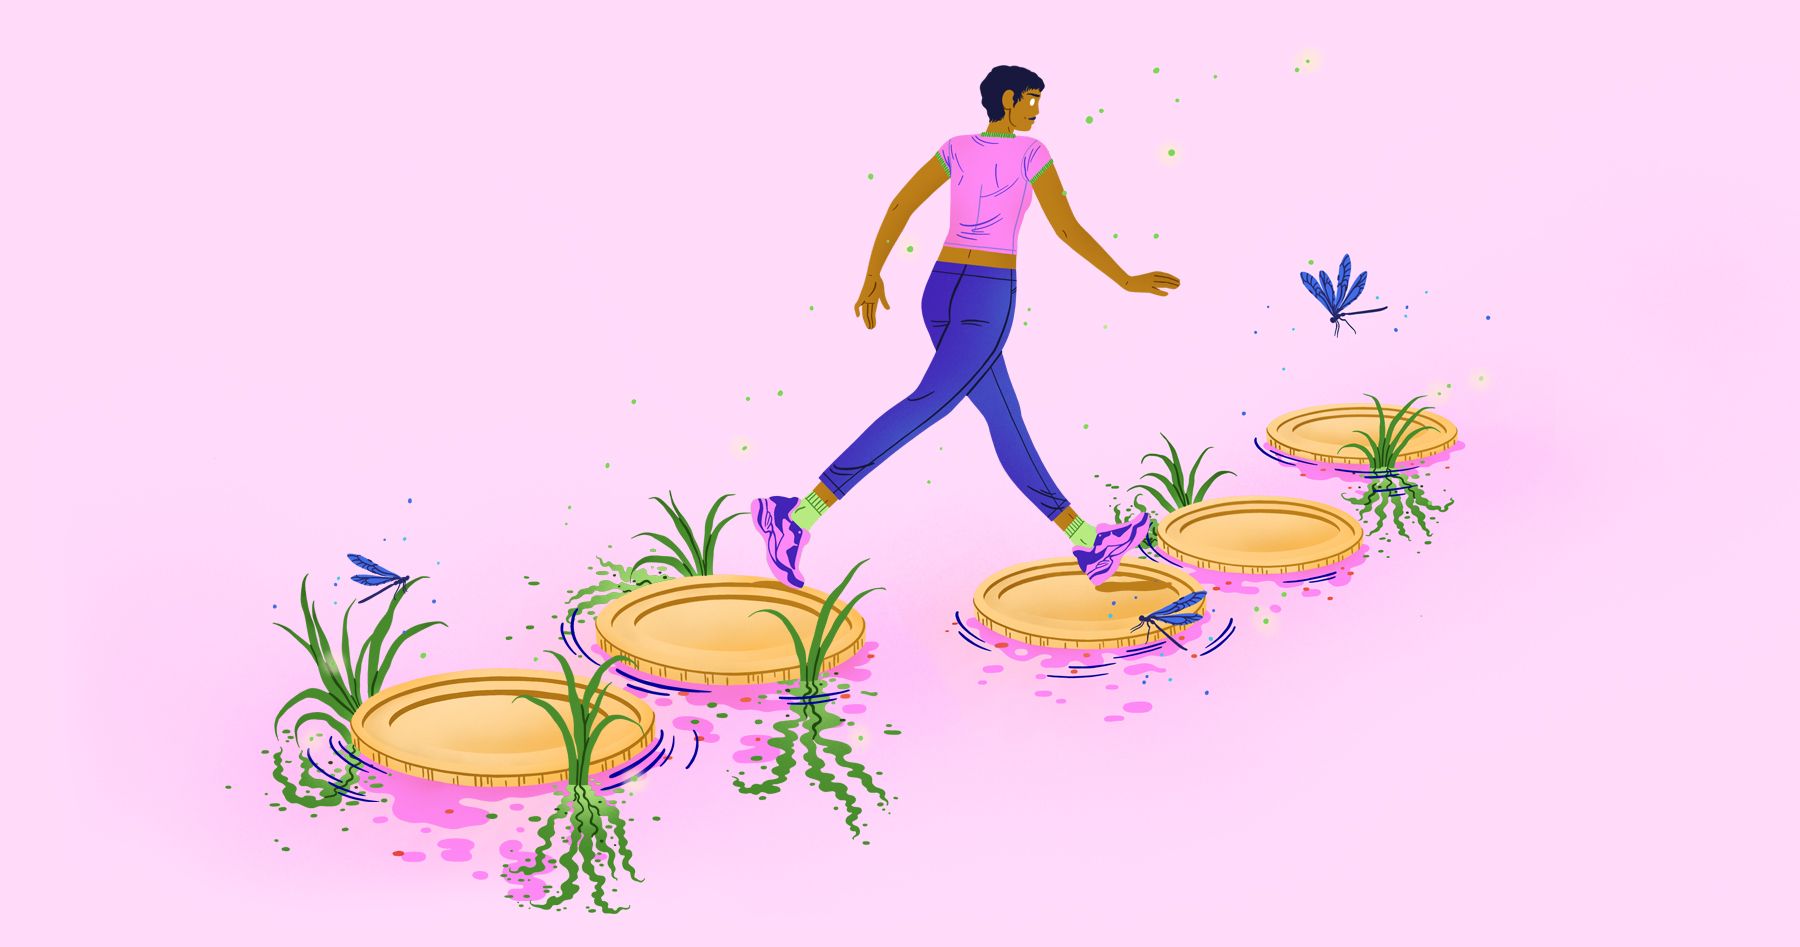 Illustration by Jessica Meyrick of a person stepping on gold coins on water.